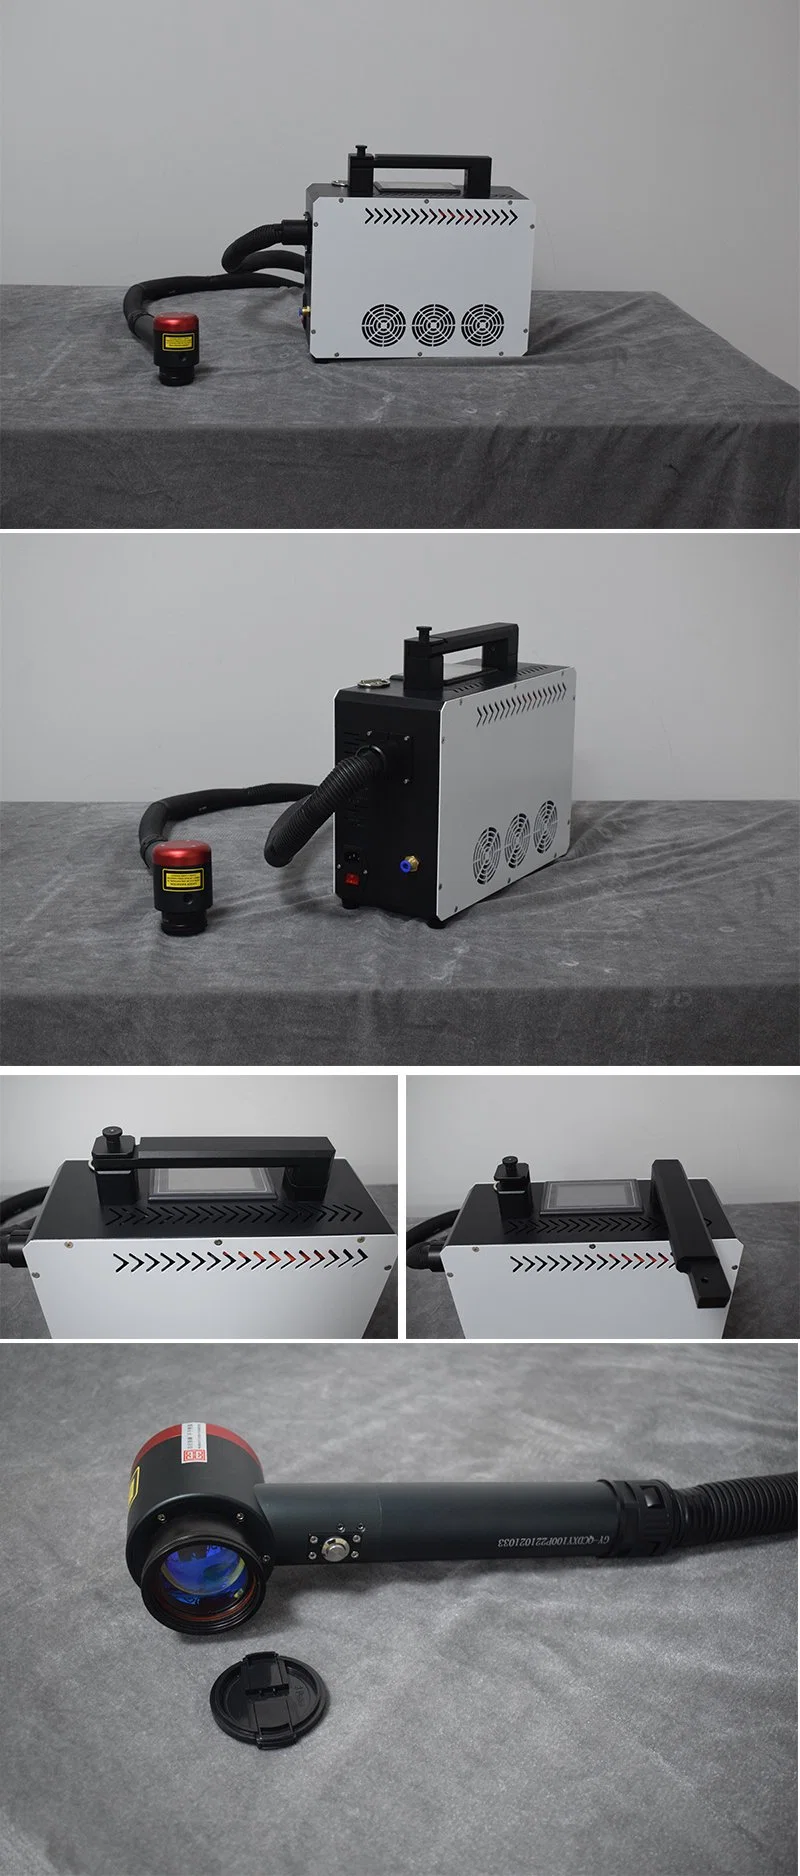 Deltaclean Portable Laser Obstacle Remover, Explosive Ordnance Disposal Laser Cleaning Machine